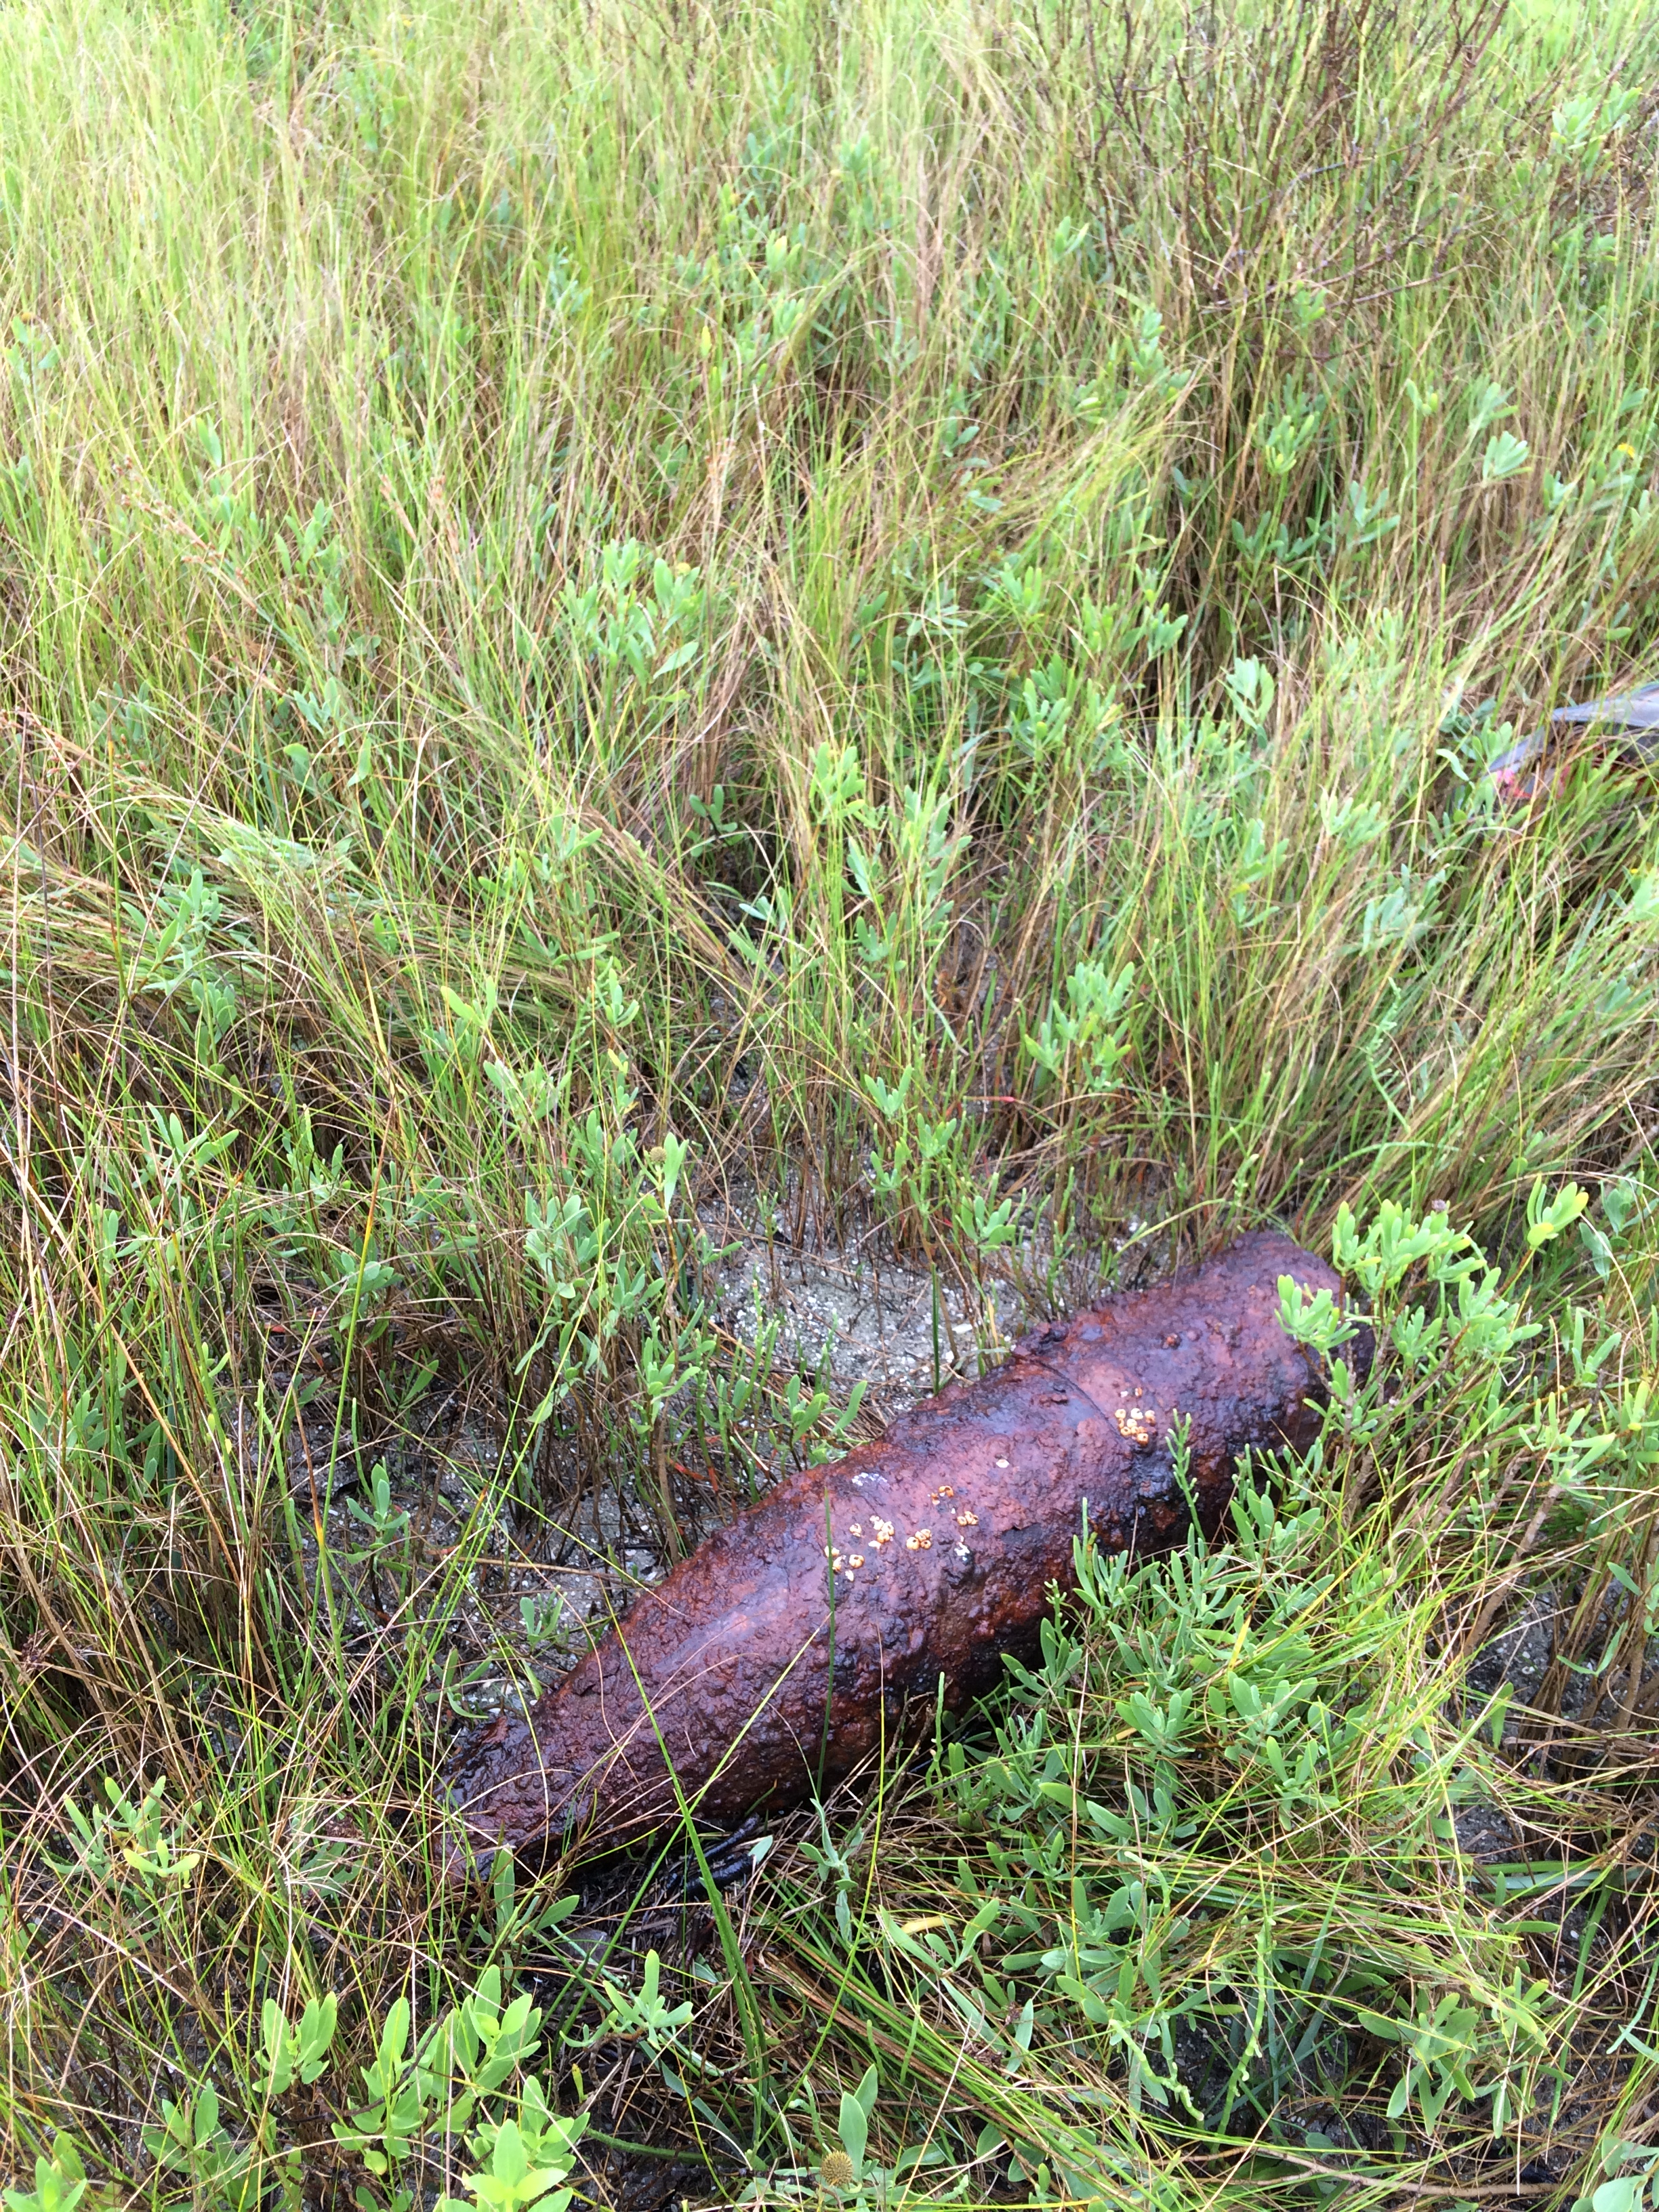 Picture of unexploded ordnance found on southern end of Hatteras Island